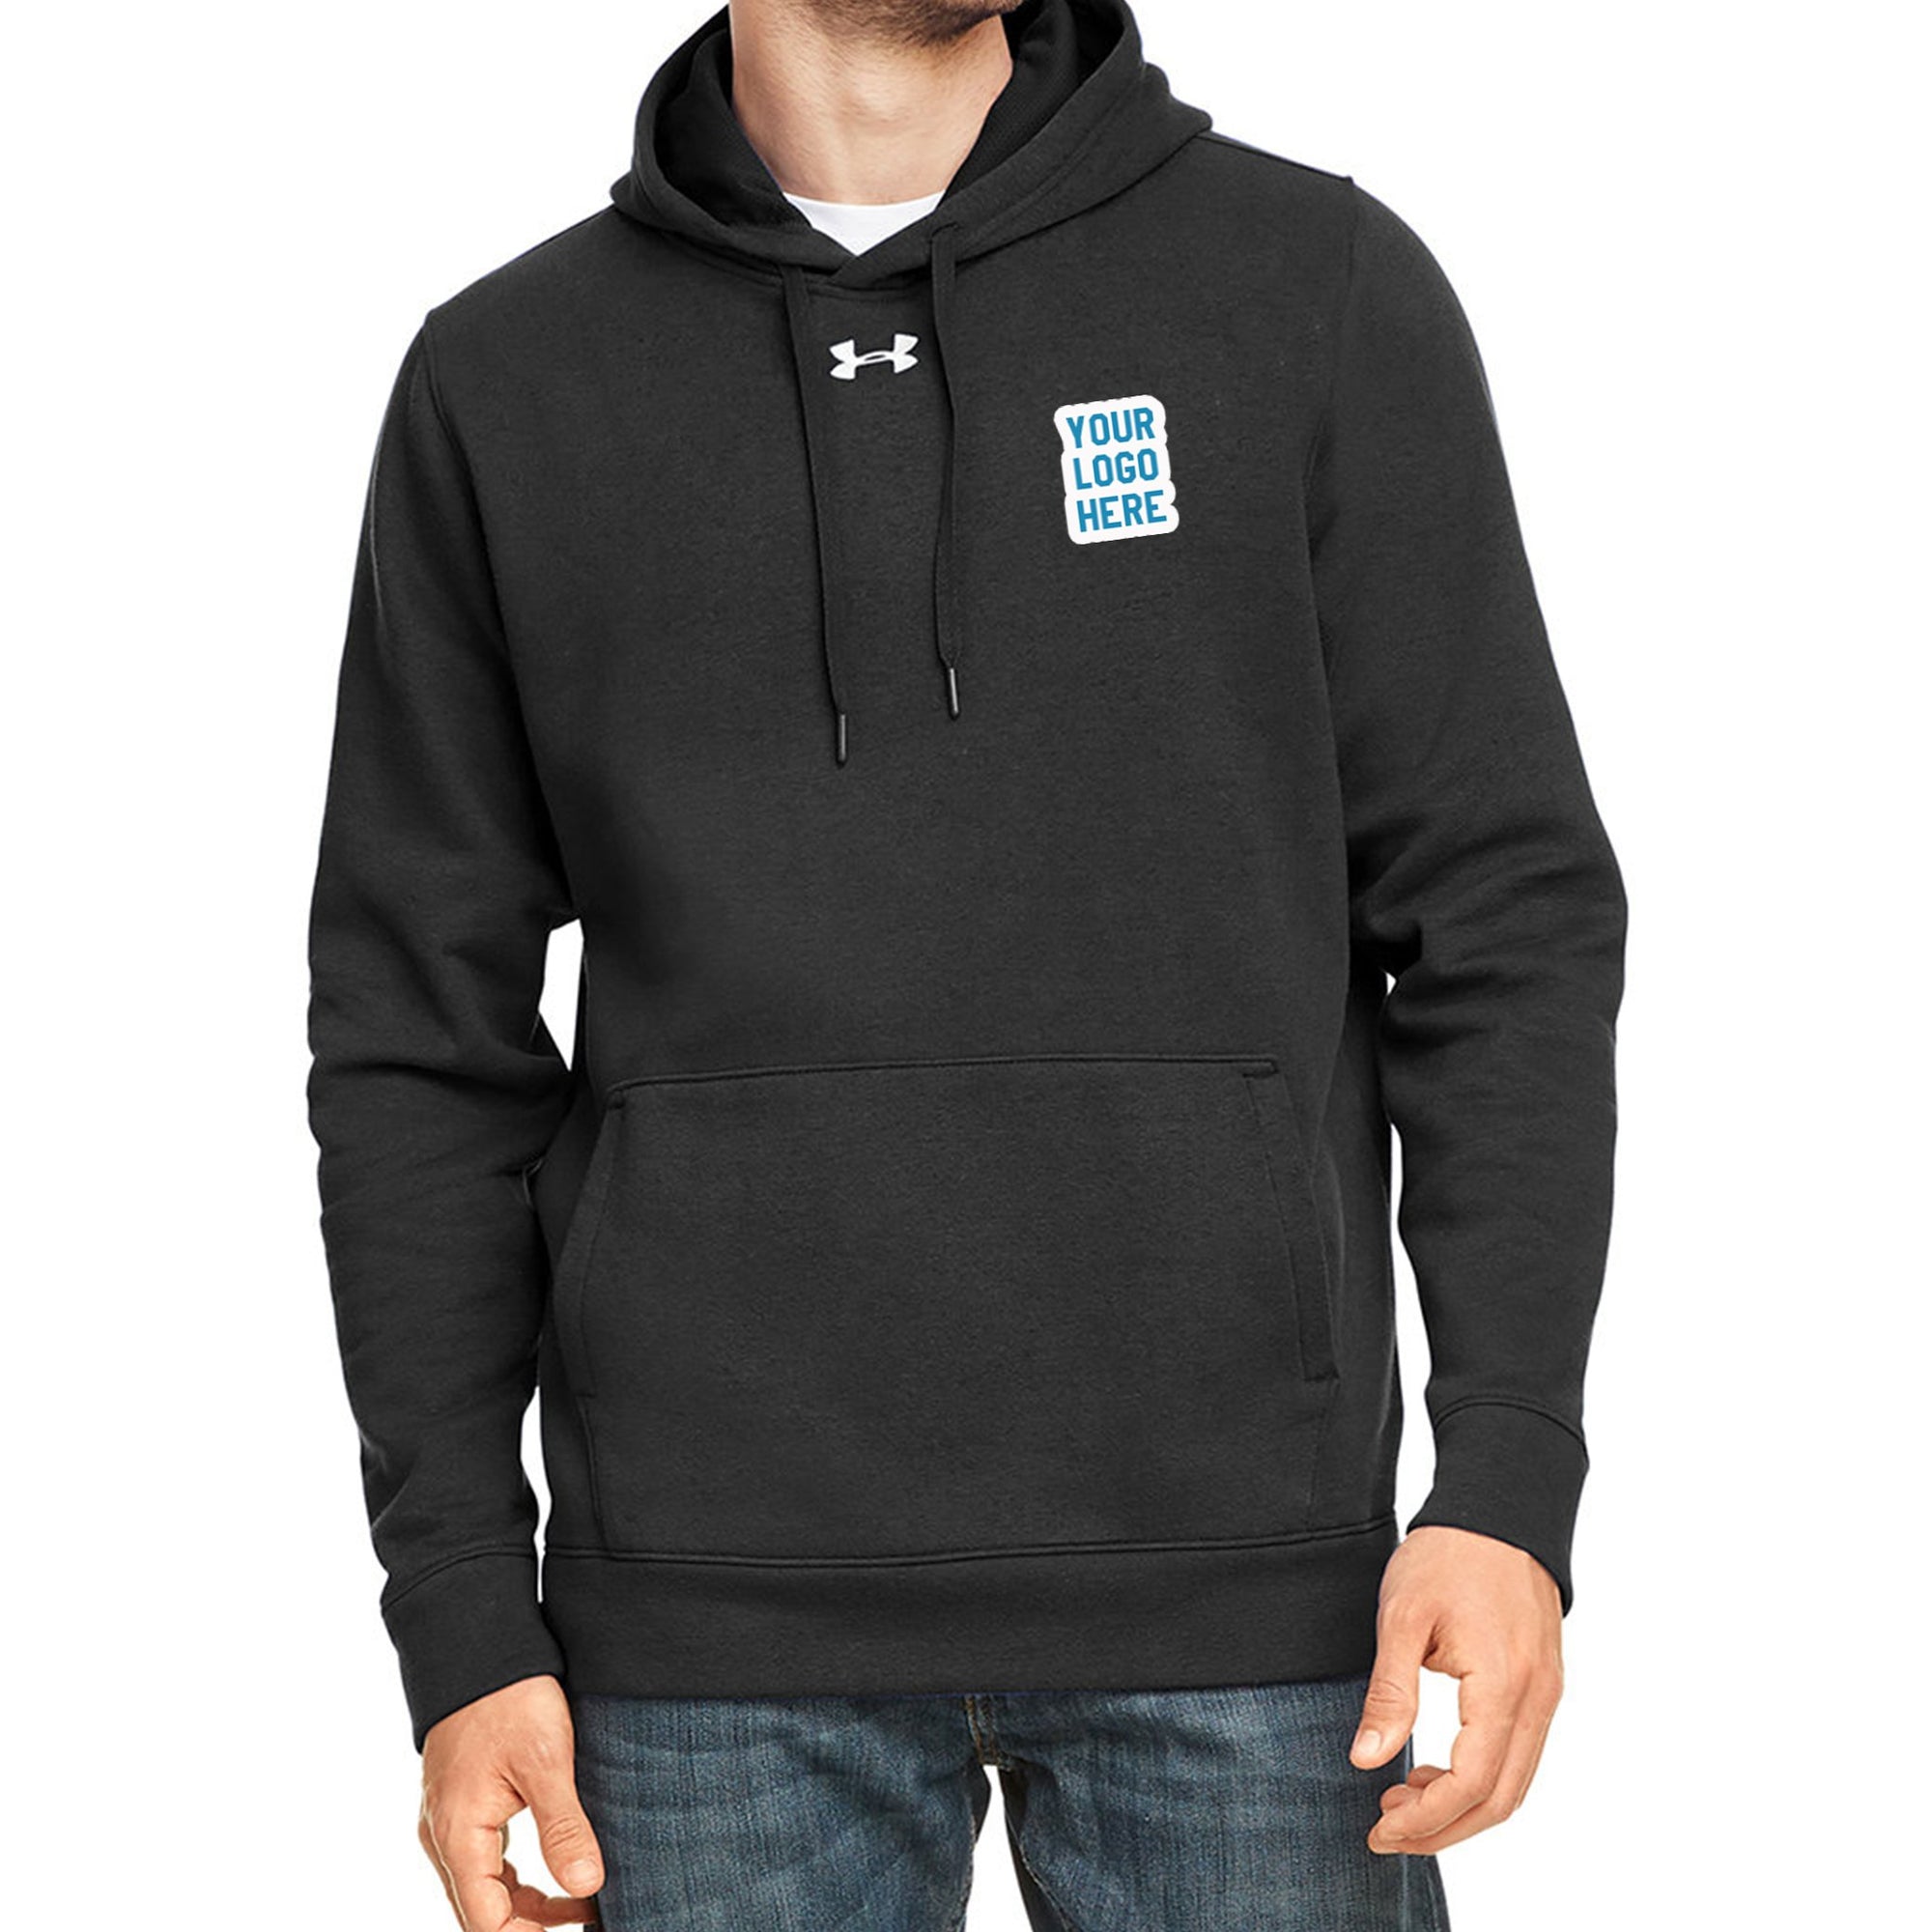 Rugby Imports Under Armour Hustle Hooded Sweatshirt